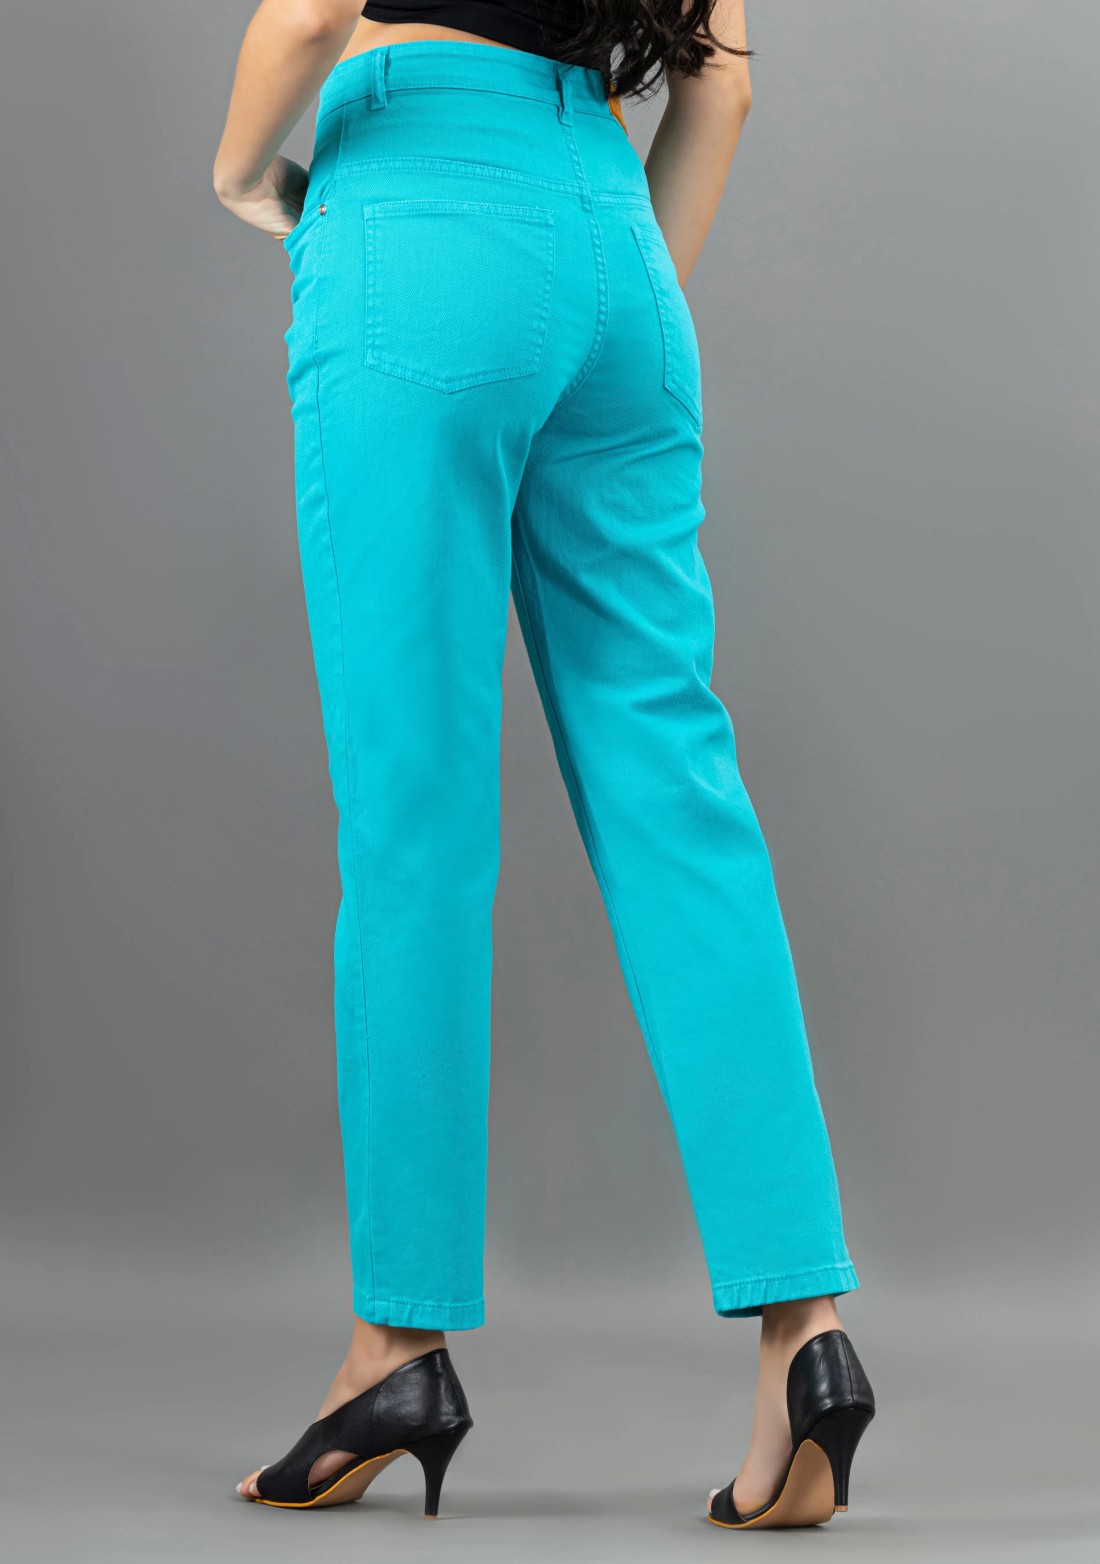 Turquoise Straight Fit Rhysley Women's Jeans